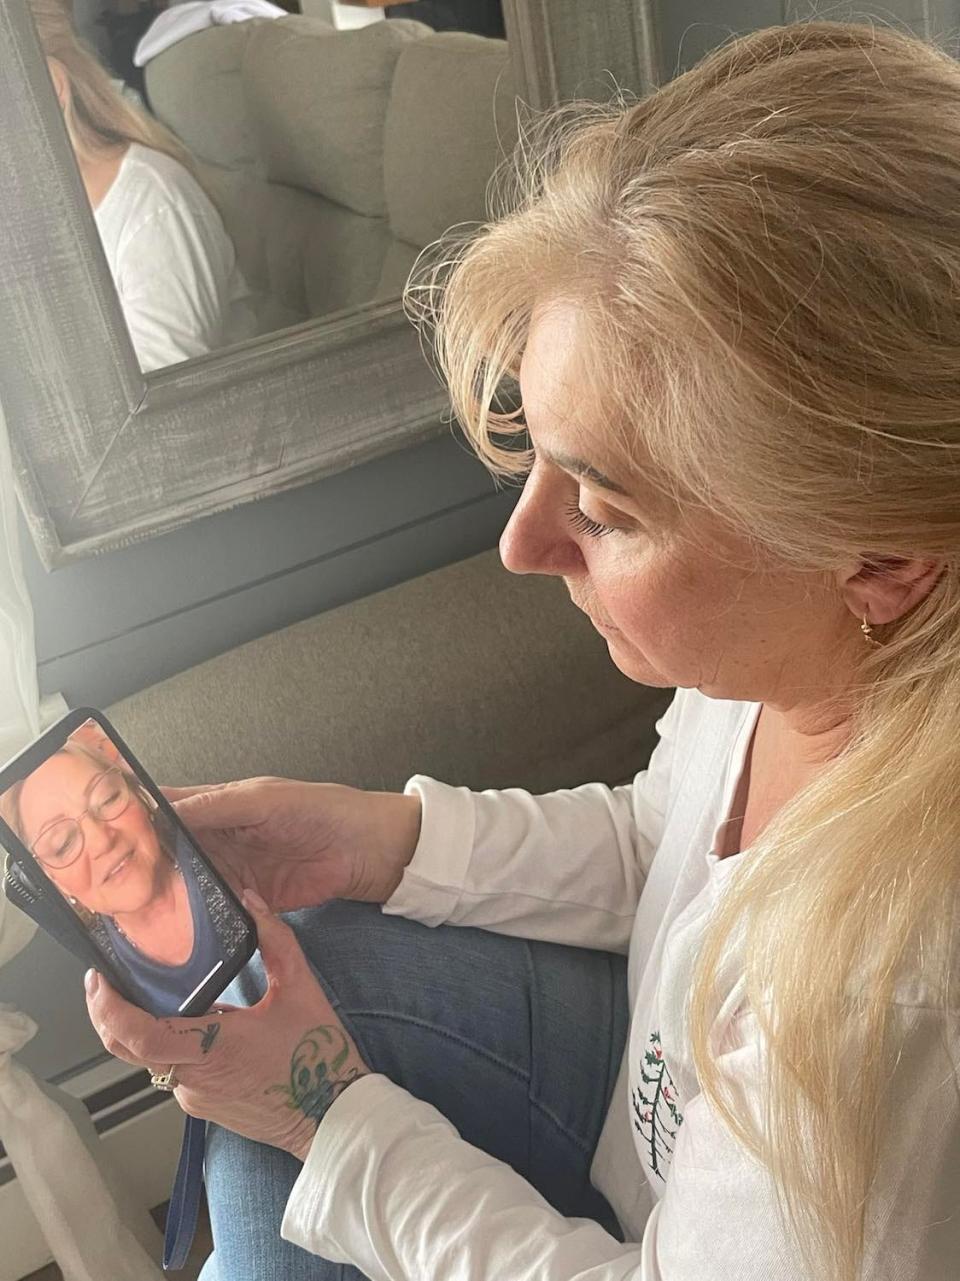 Pegi Dran Conte of Taunton holds a screenshot of her cousin Oksana Danilyuk of Ukraine, whom she has been speaking to on Facebook Video Chat since the Russian invasion of Ukraine and prior.